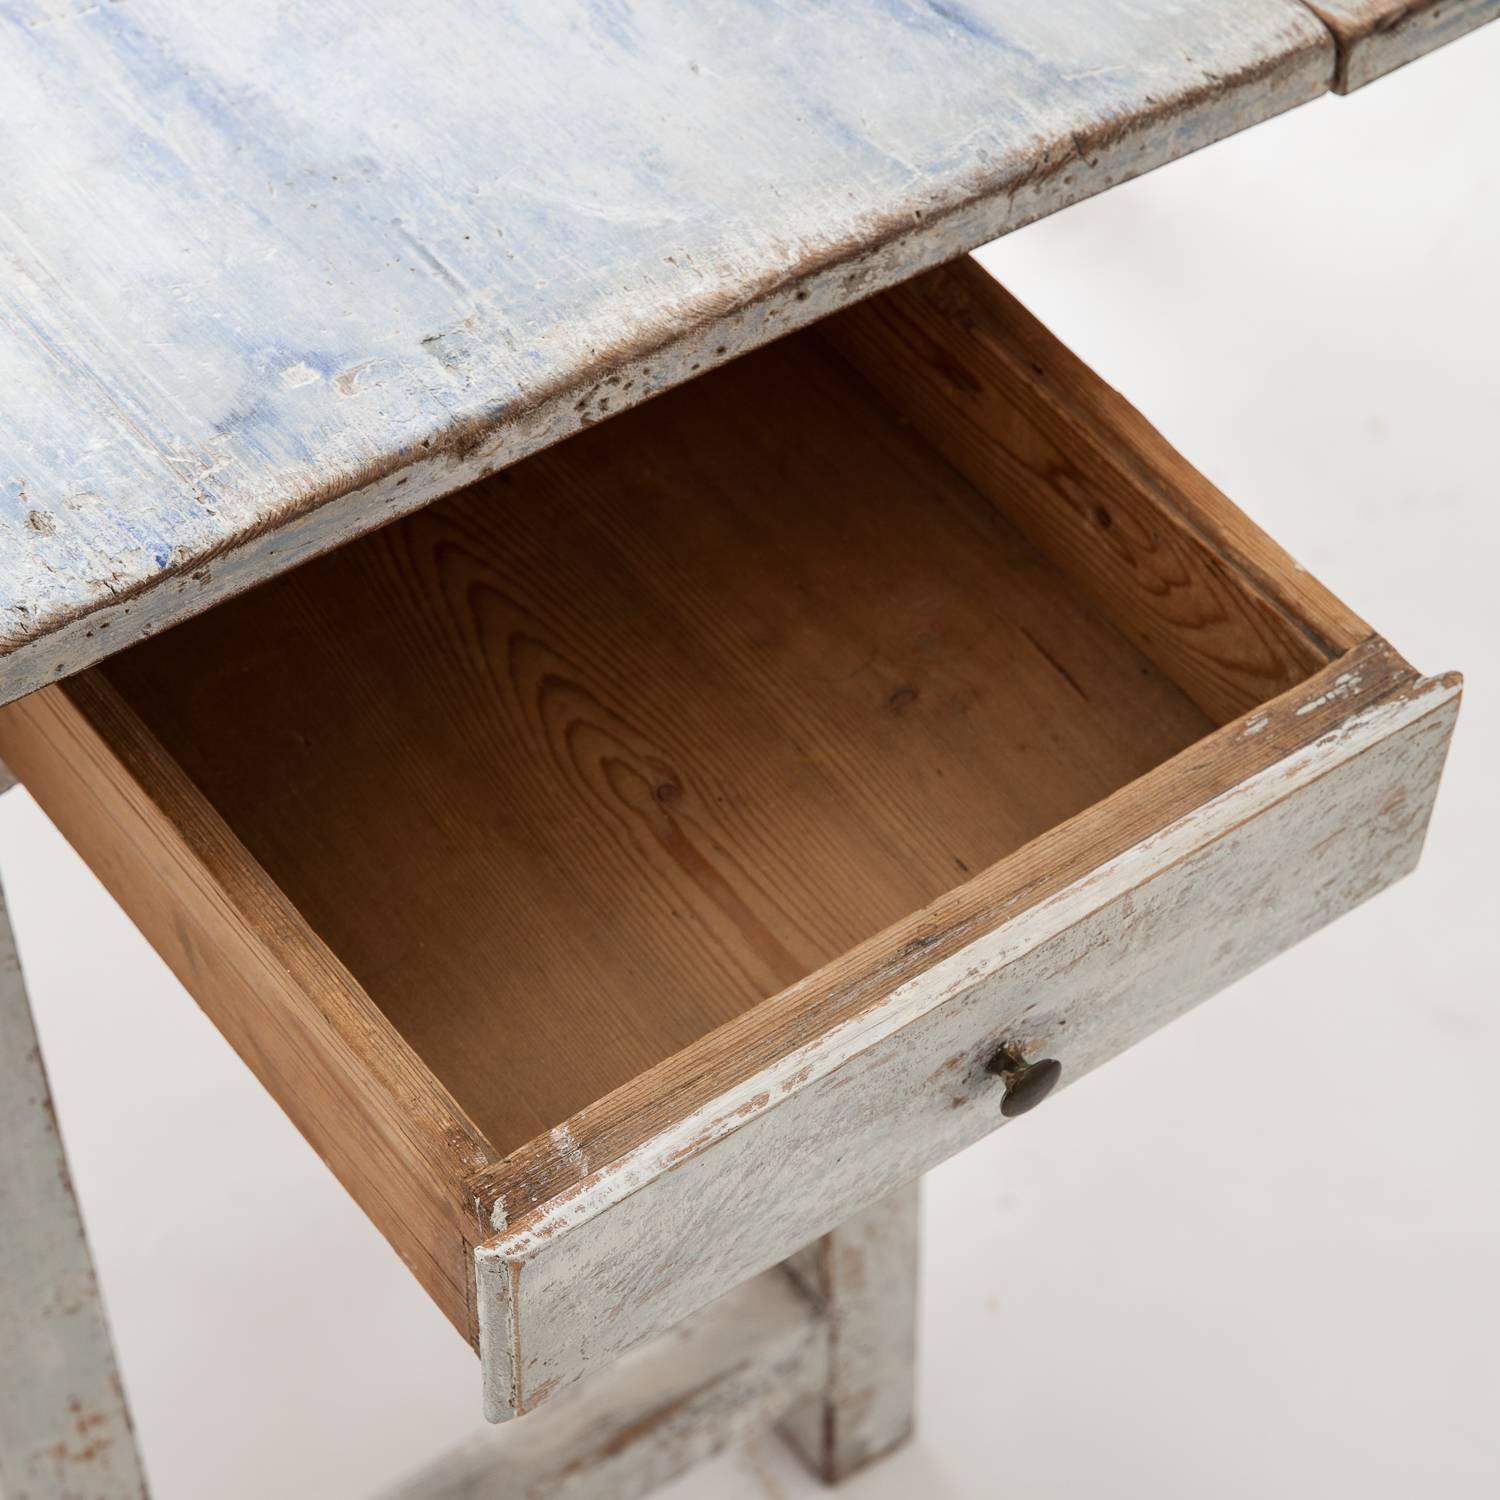 19th Century Swedish Blue and White Original Painted Drop-Leaf Table, circa 1820